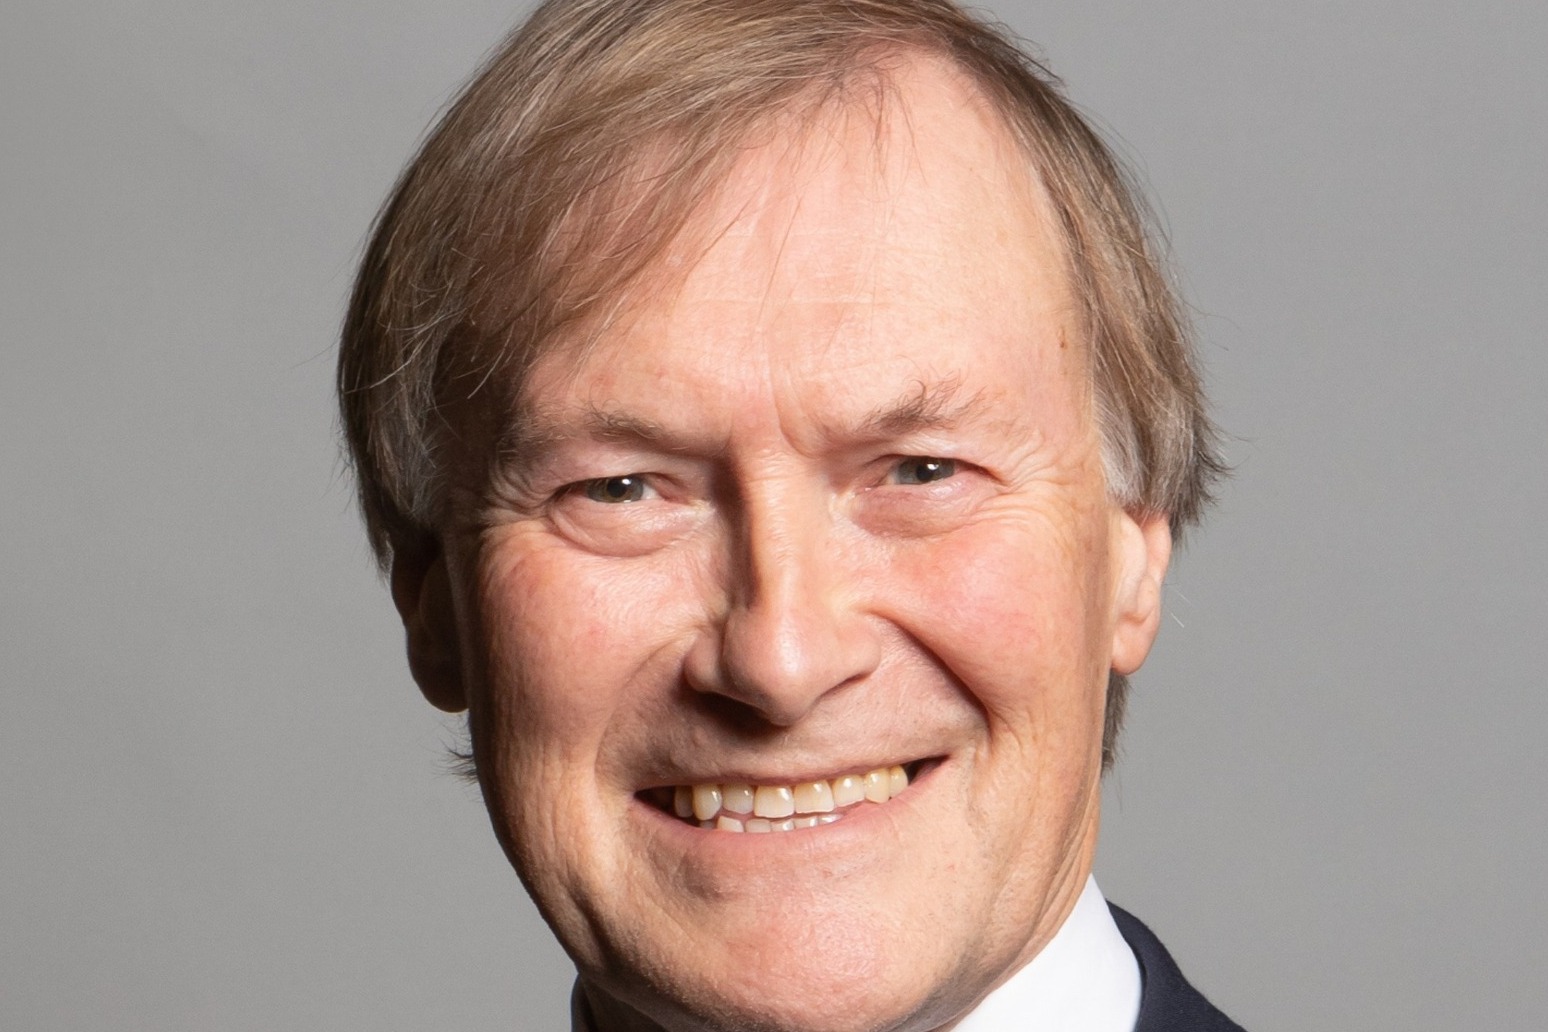 Requiem mass to be held at Westminster Cathedral for murdered MP Sir David Amess 